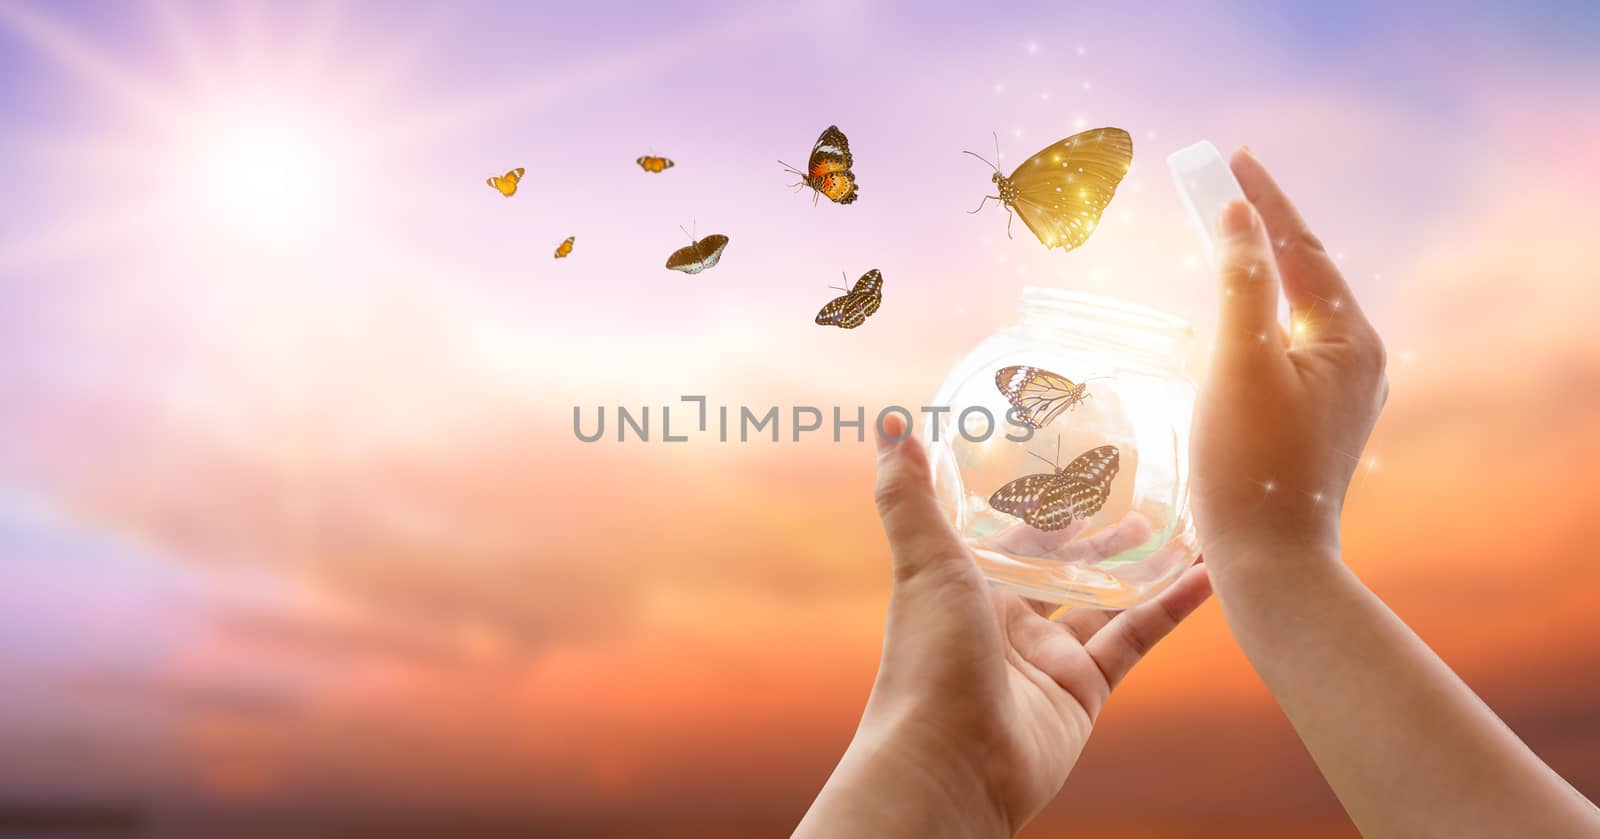 The girl frees the butterfly from the jar, golden blue moment Concept of freedom by sarayut_thaneerat